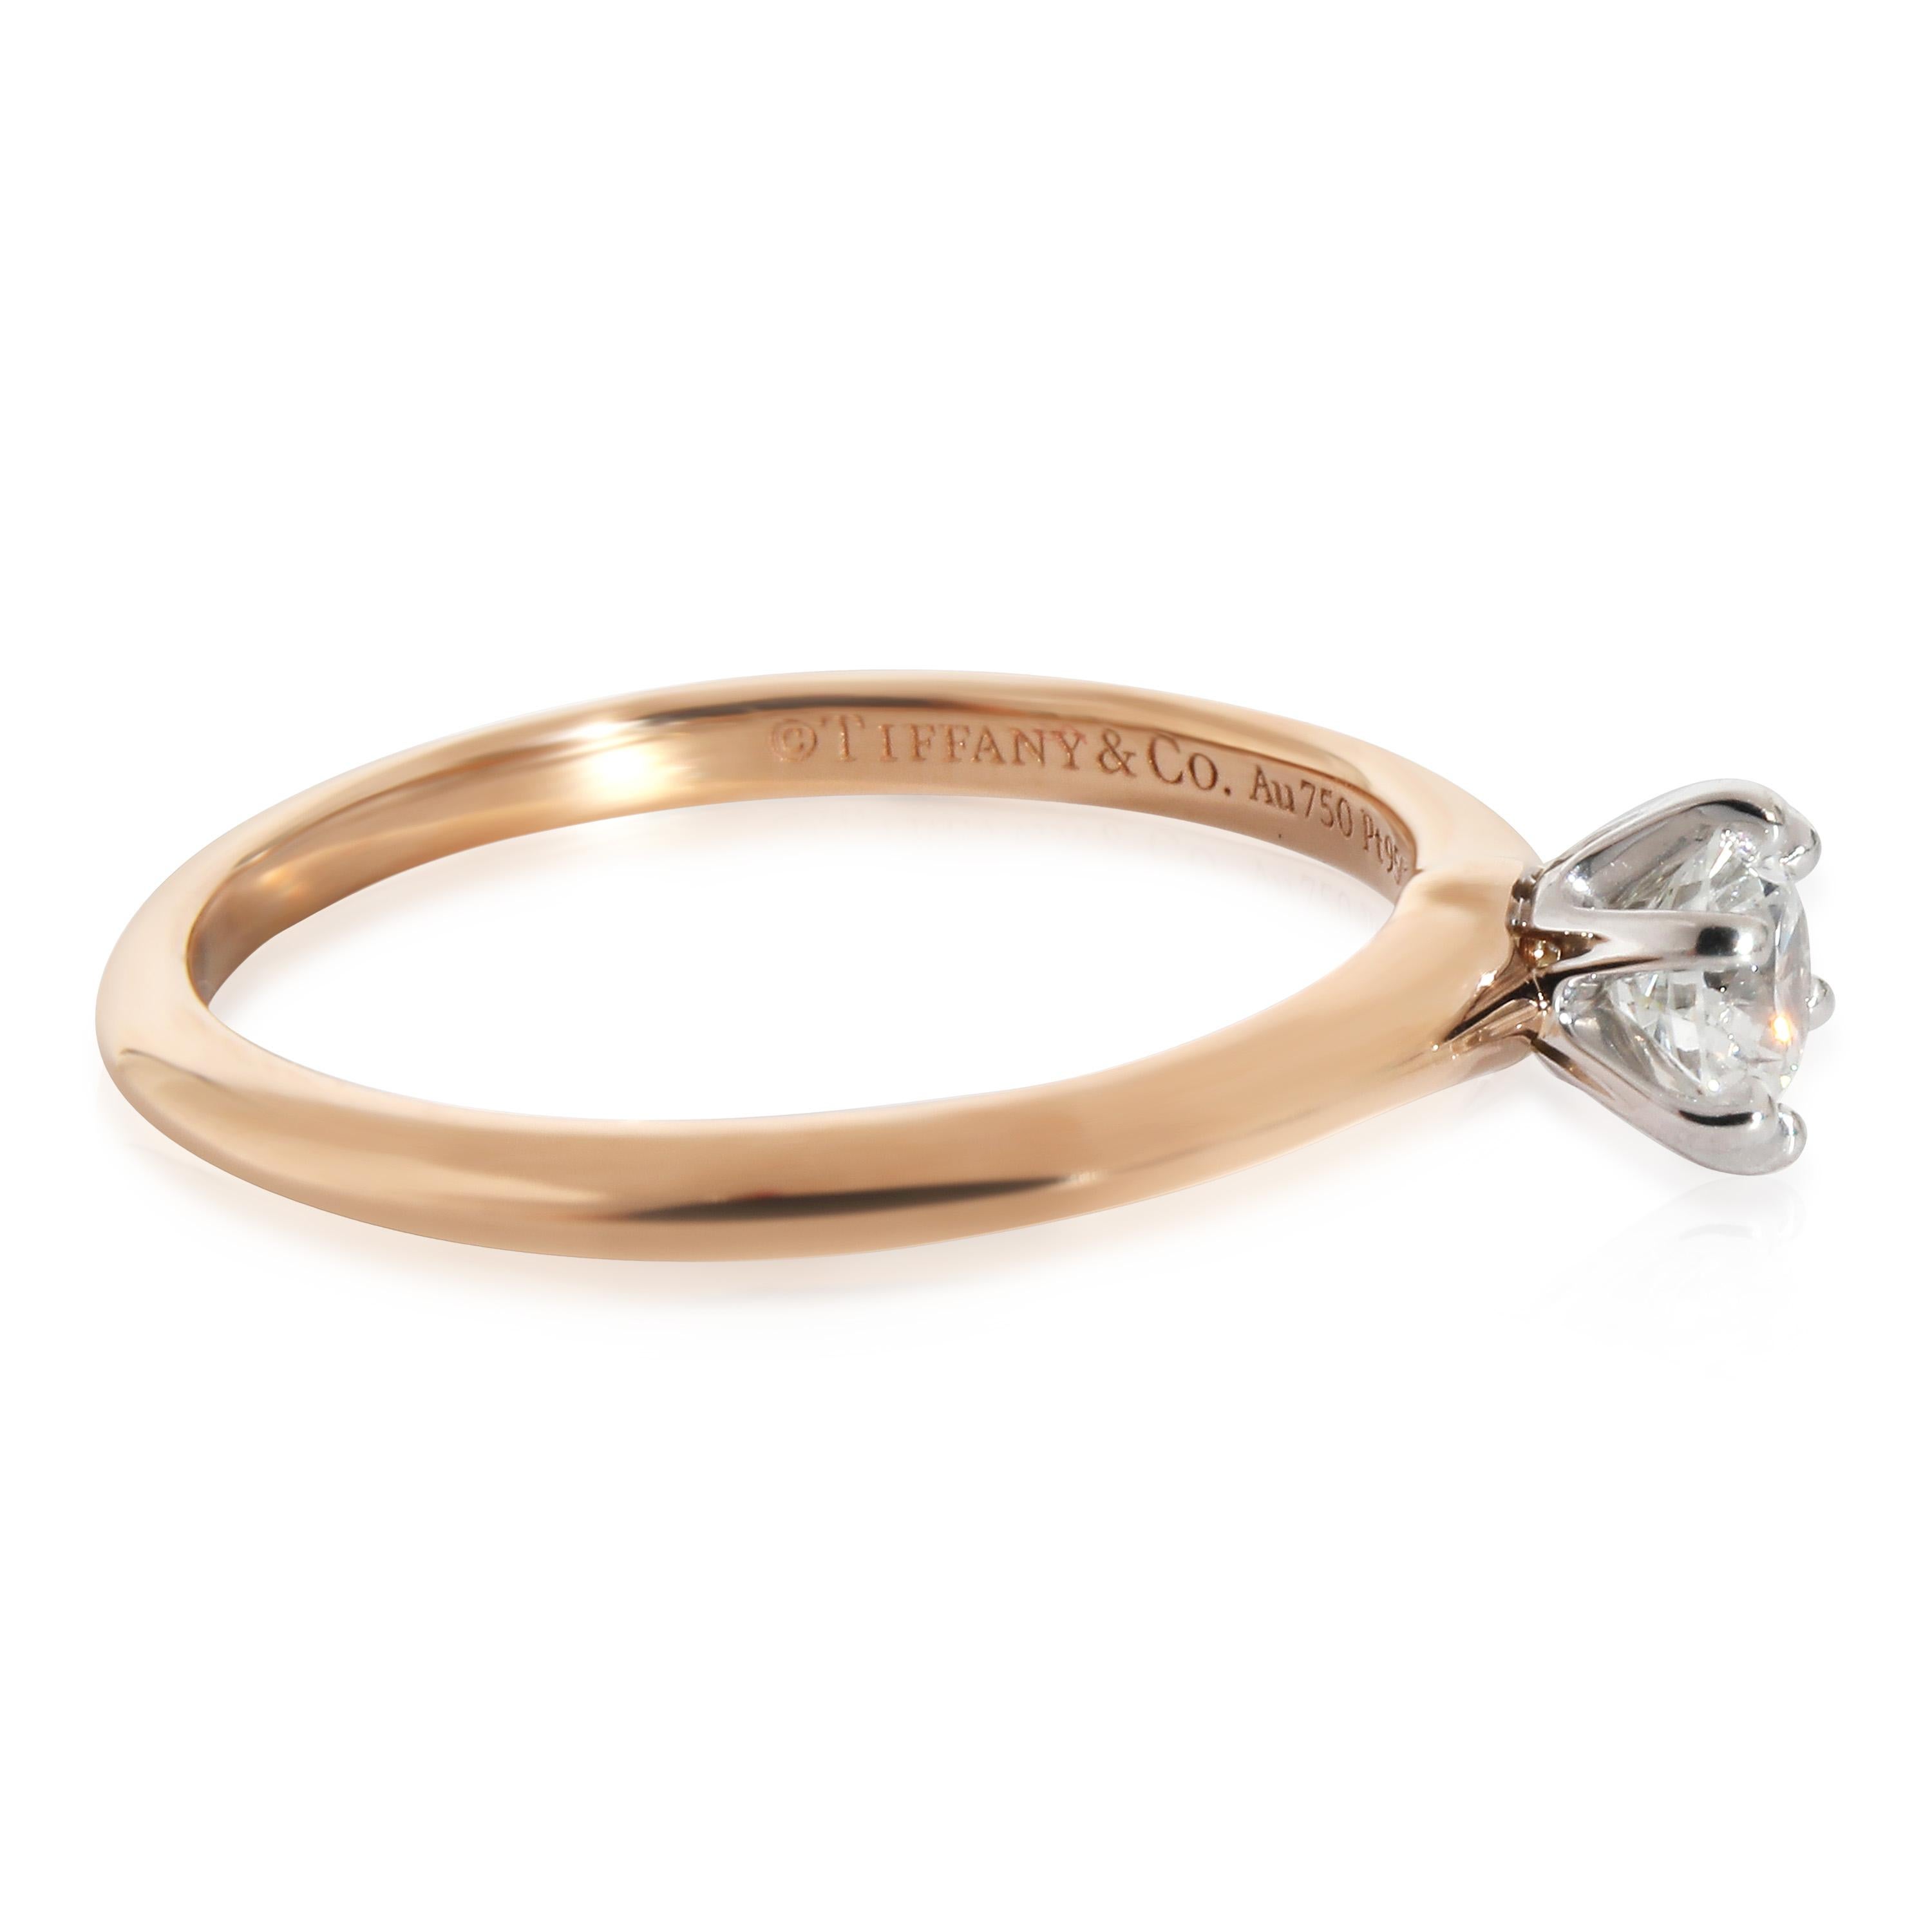 Tiffany & Co. Diamond Engagement Ring in 18k Pink Gold/Platinum F IF 0.3 CTW In Excellent Condition For Sale In New York, NY